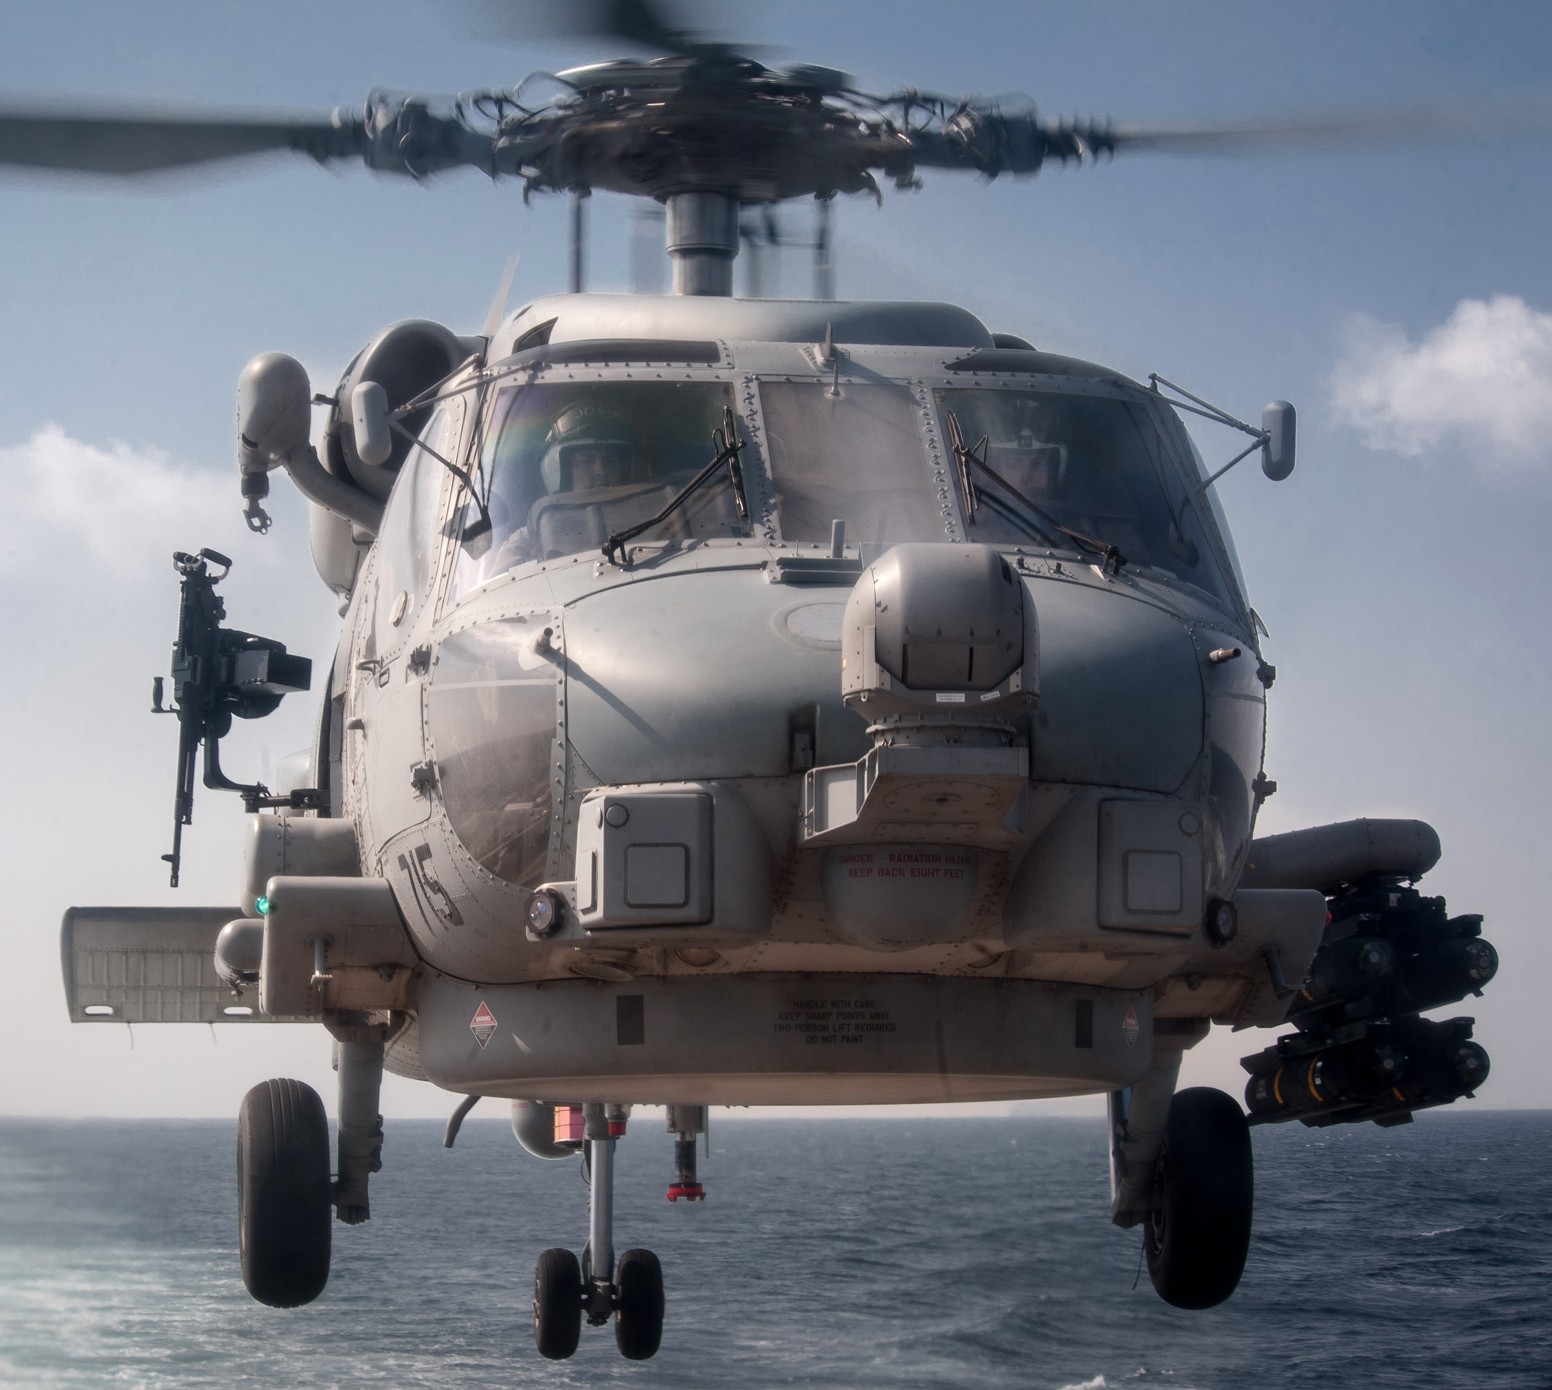 hsm-75 wolfpack helicopter maritime strike squadron us navy mh-60r seahawk 2013 30